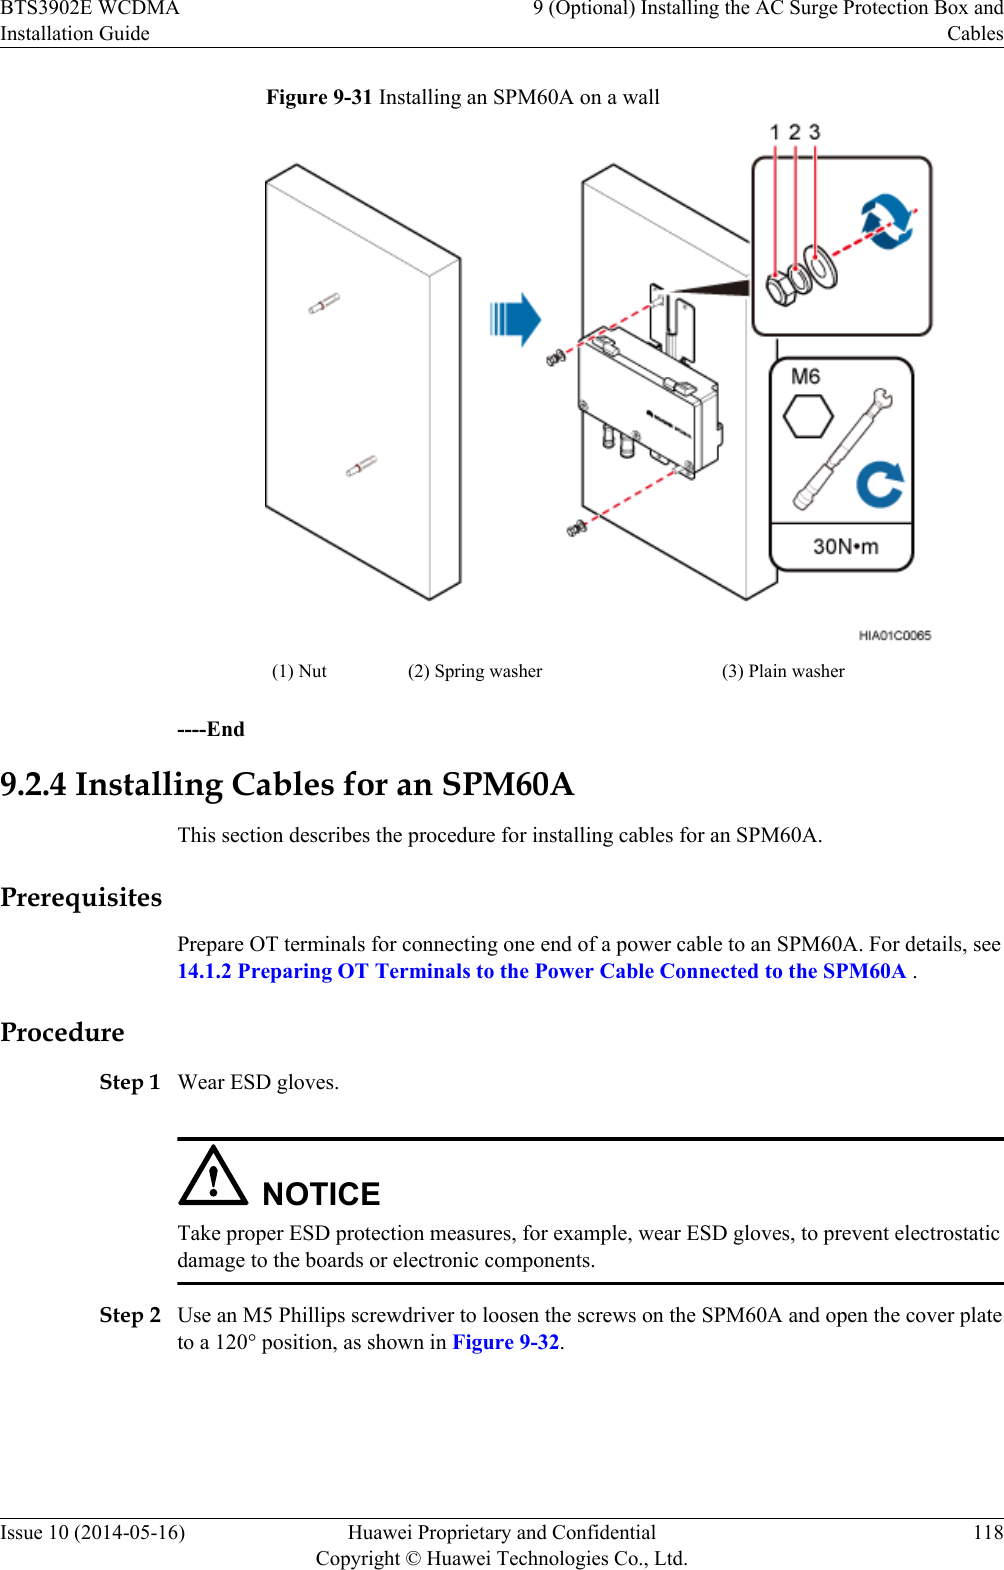 Figure 9-31 Installing an SPM60A on a wall(1) Nut (2) Spring washer (3) Plain washer----End9.2.4 Installing Cables for an SPM60AThis section describes the procedure for installing cables for an SPM60A.PrerequisitesPrepare OT terminals for connecting one end of a power cable to an SPM60A. For details, see14.1.2 Preparing OT Terminals to the Power Cable Connected to the SPM60A .ProcedureStep 1 Wear ESD gloves.NOTICETake proper ESD protection measures, for example, wear ESD gloves, to prevent electrostaticdamage to the boards or electronic components.Step 2 Use an M5 Phillips screwdriver to loosen the screws on the SPM60A and open the cover plateto a 120° position, as shown in Figure 9-32.BTS3902E WCDMAInstallation Guide9 (Optional) Installing the AC Surge Protection Box andCablesIssue 10 (2014-05-16) Huawei Proprietary and ConfidentialCopyright © Huawei Technologies Co., Ltd.118